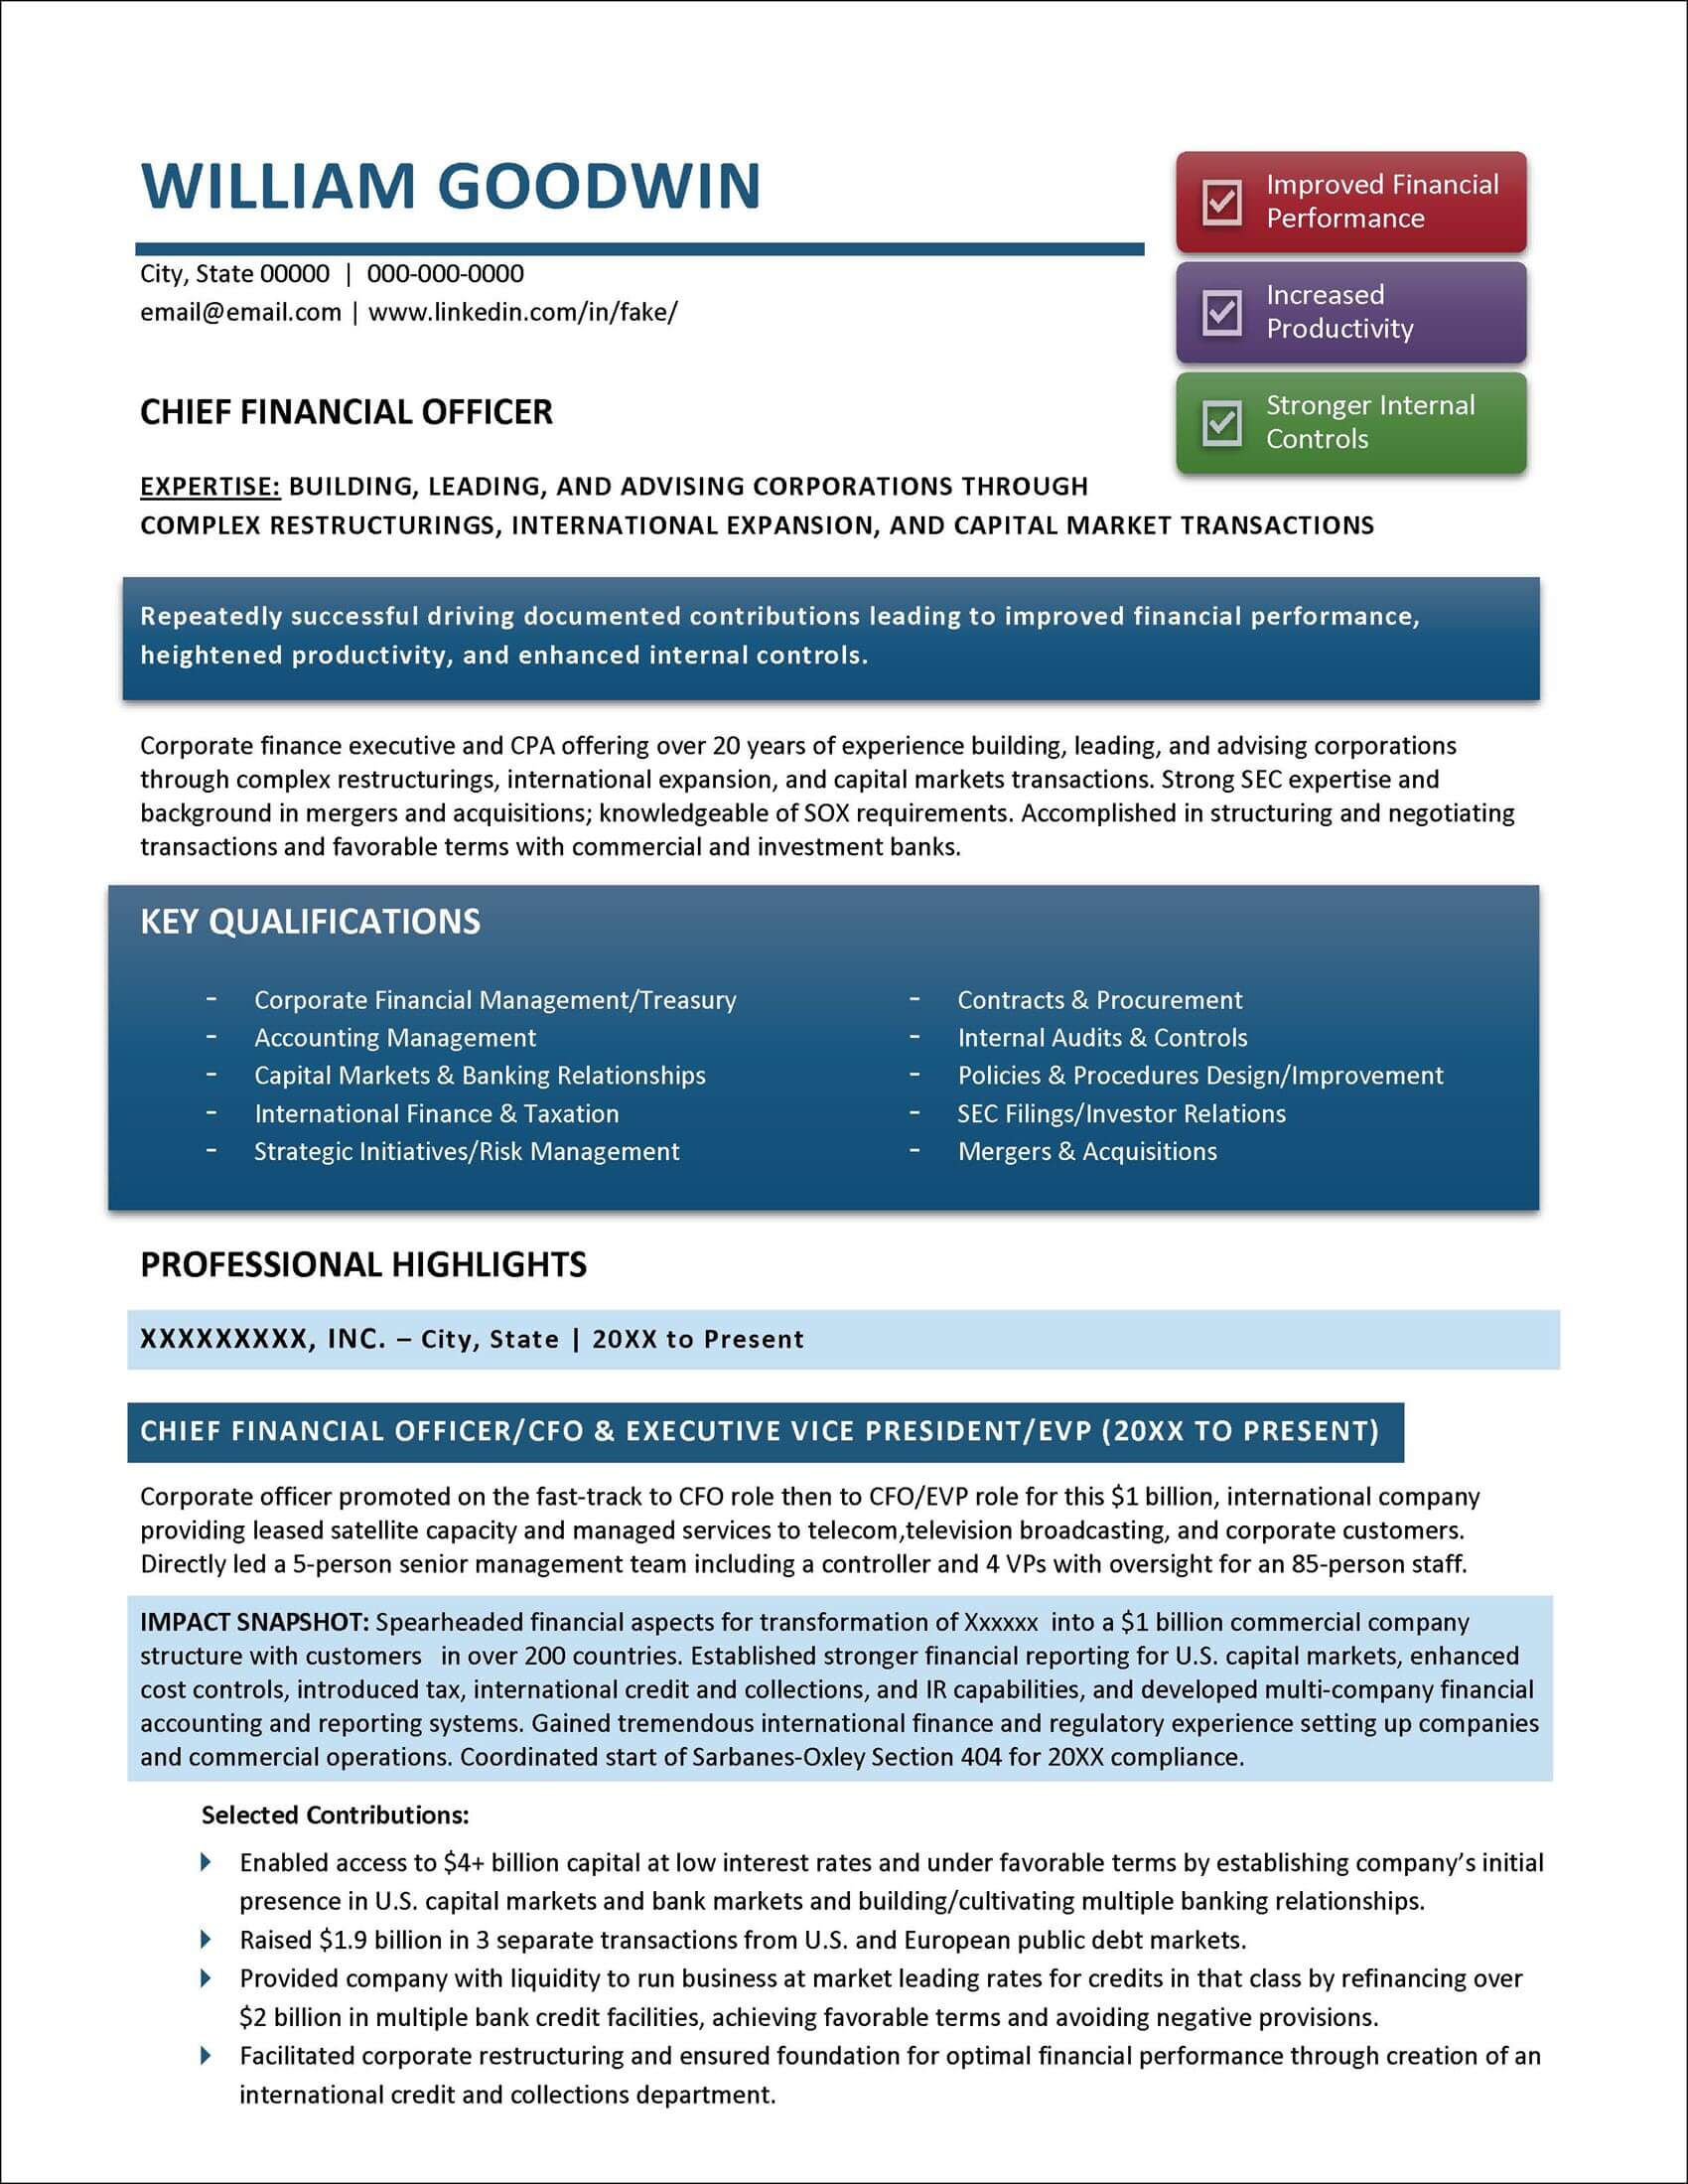 Example CFO Resume Page 1